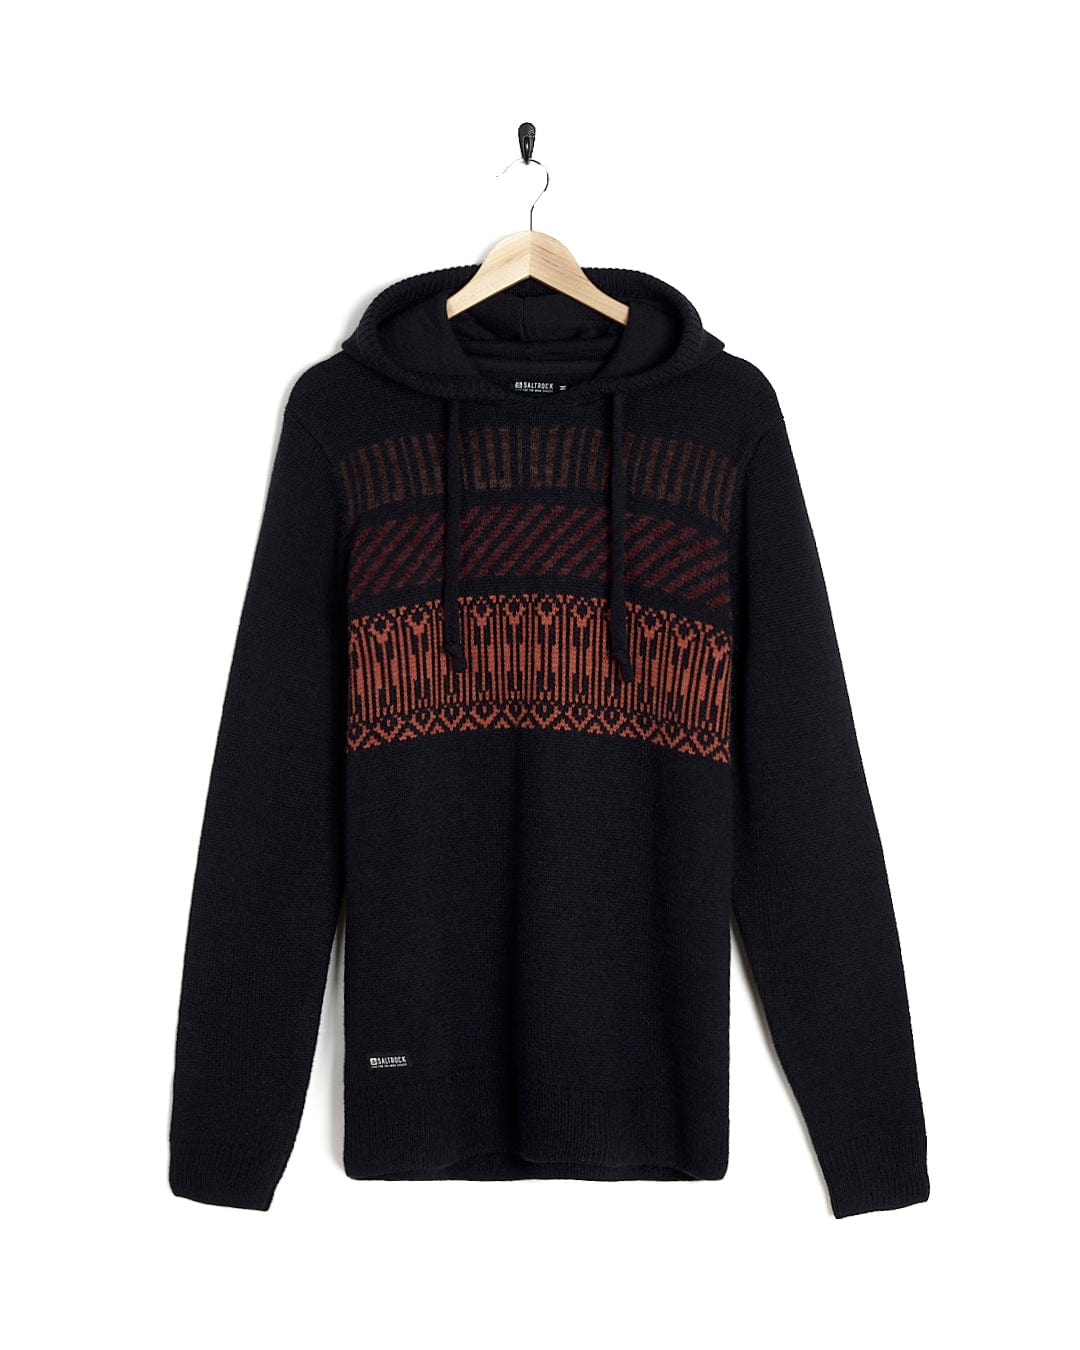 A Lukas - Mens Knitted Hoodie - Dark Blue from Saltrock with an orange and black pattern.